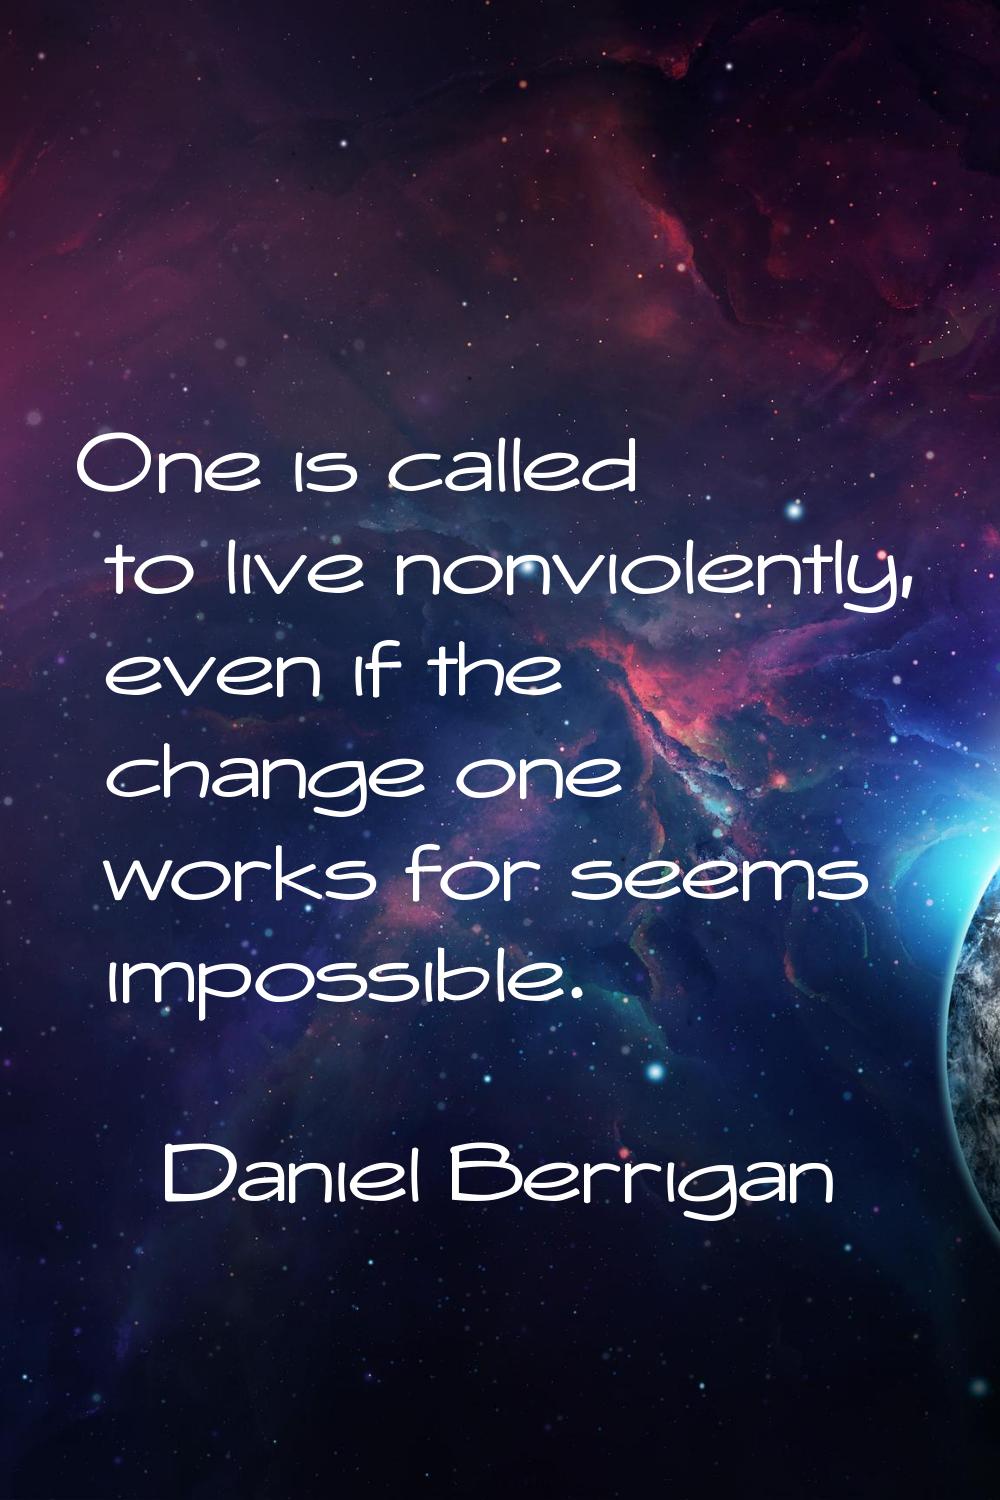 One is called to live nonviolently, even if the change one works for seems impossible.